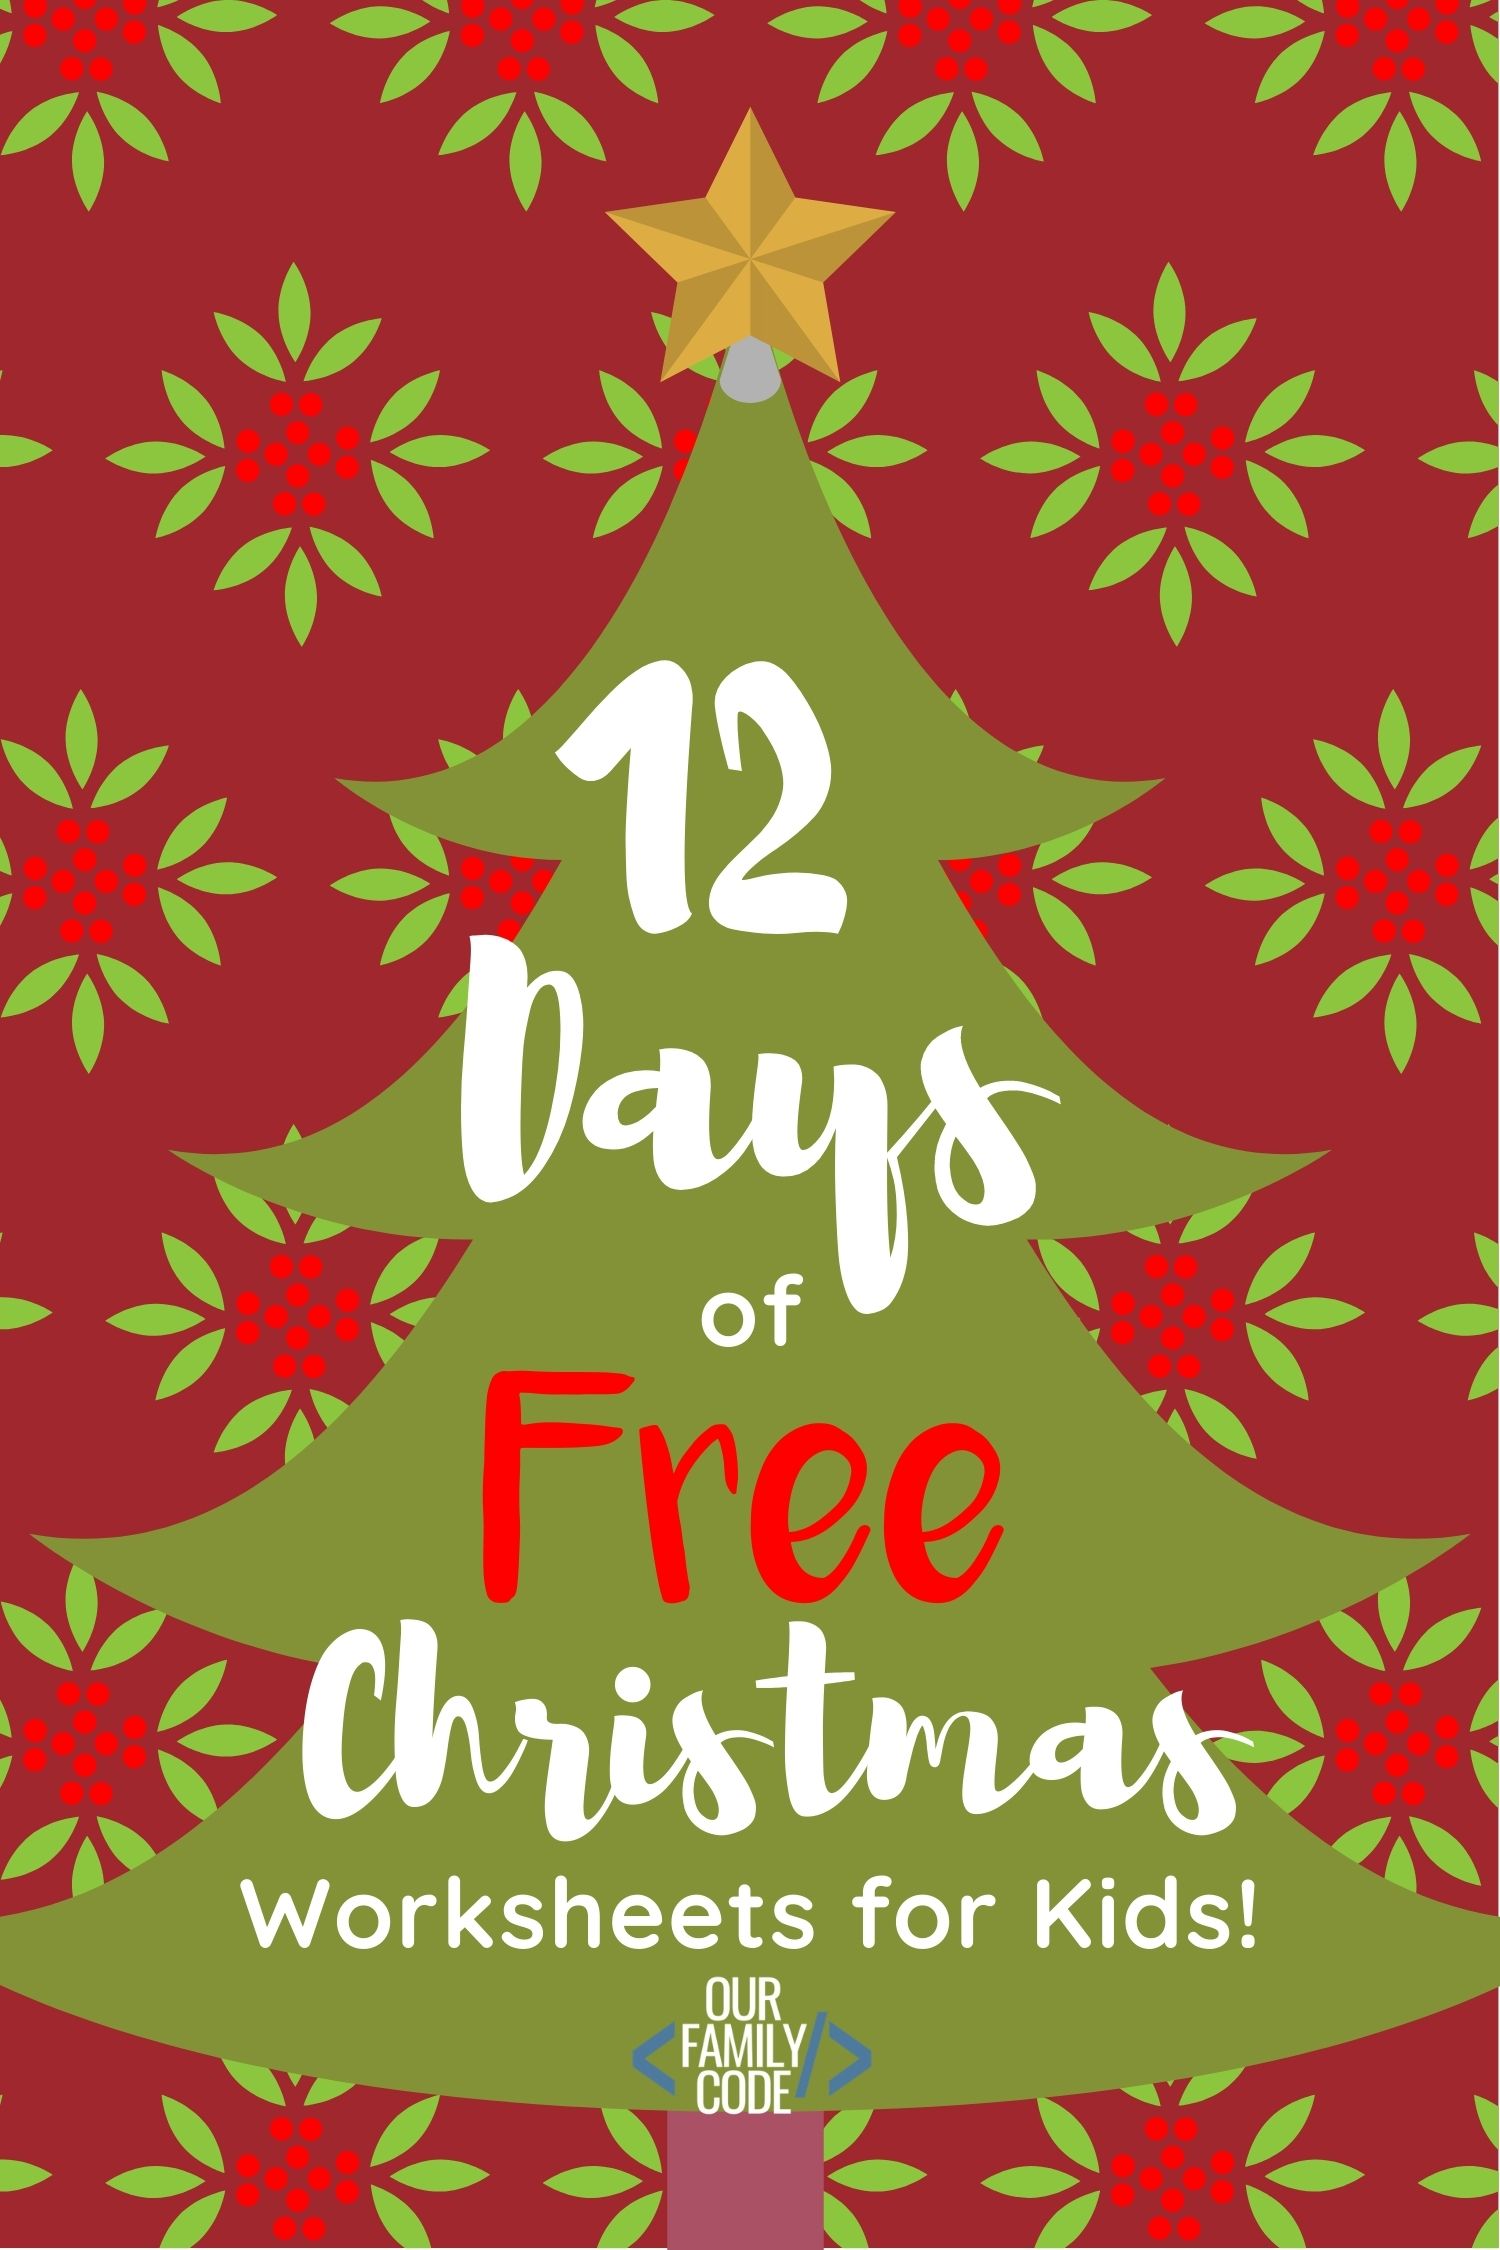 Free Christmas worksheets for kids: I-Spy, Color Recognition, Number Recognition, Coloring Pages, Letter Recognition, Christmas Addition, & Less Than or Greater Than Christmas Decorations! #easykidworksheets #Winterprintables #freekidactivities #freekidprintables #freepreschoolworksheets #winterworksheets #Christmaskidsactivities #Christmasprintables #freekidworksheets